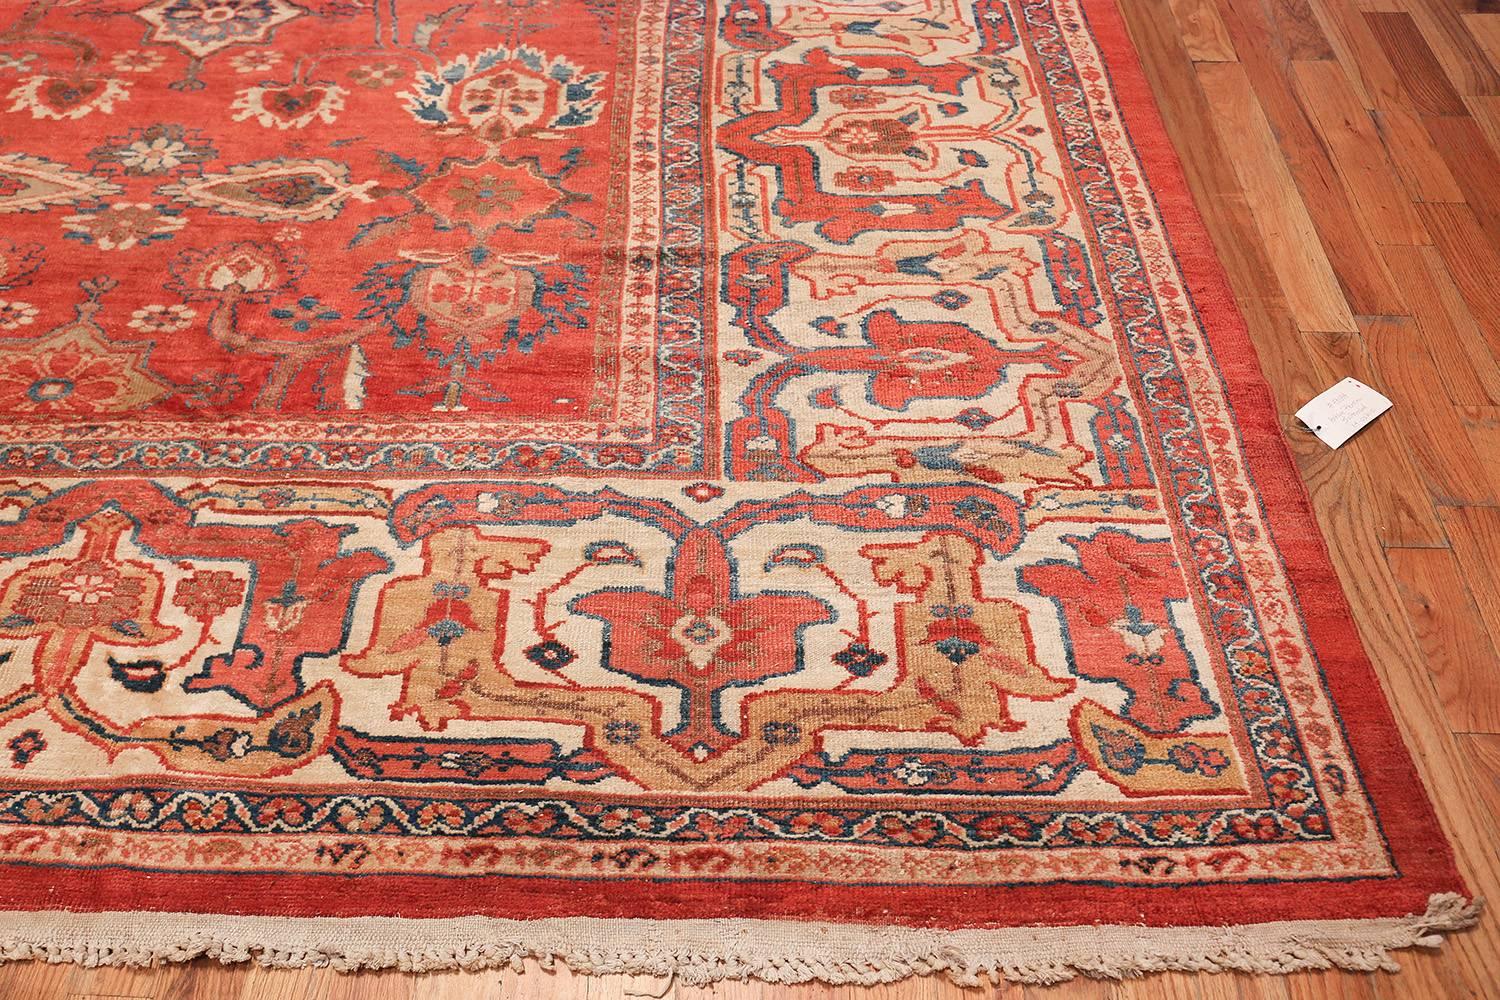 Largw Oversize Red Antique Persian Sultanabad Rug. Size: 14 ft x 21 ft 3